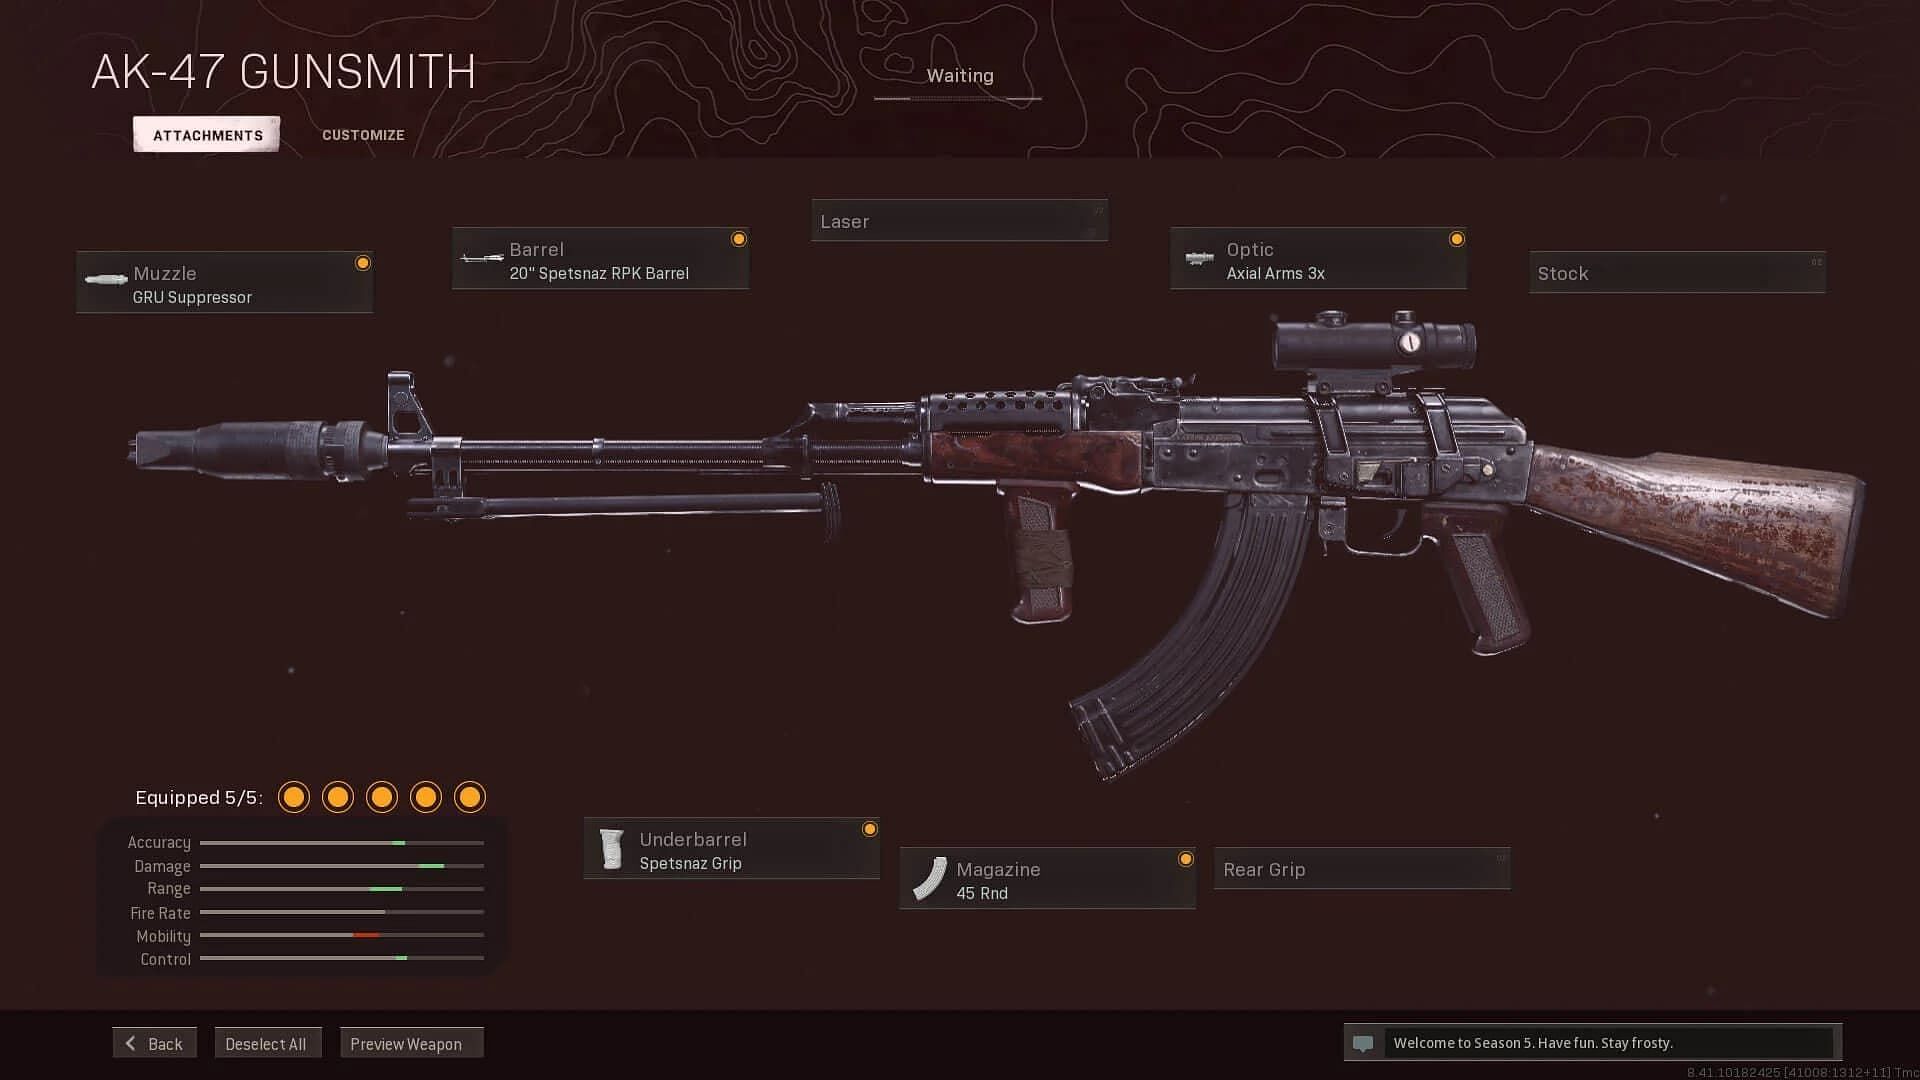 Head to the Gunsmith page for the AK-47 and give it these attachments (Image via Activision)